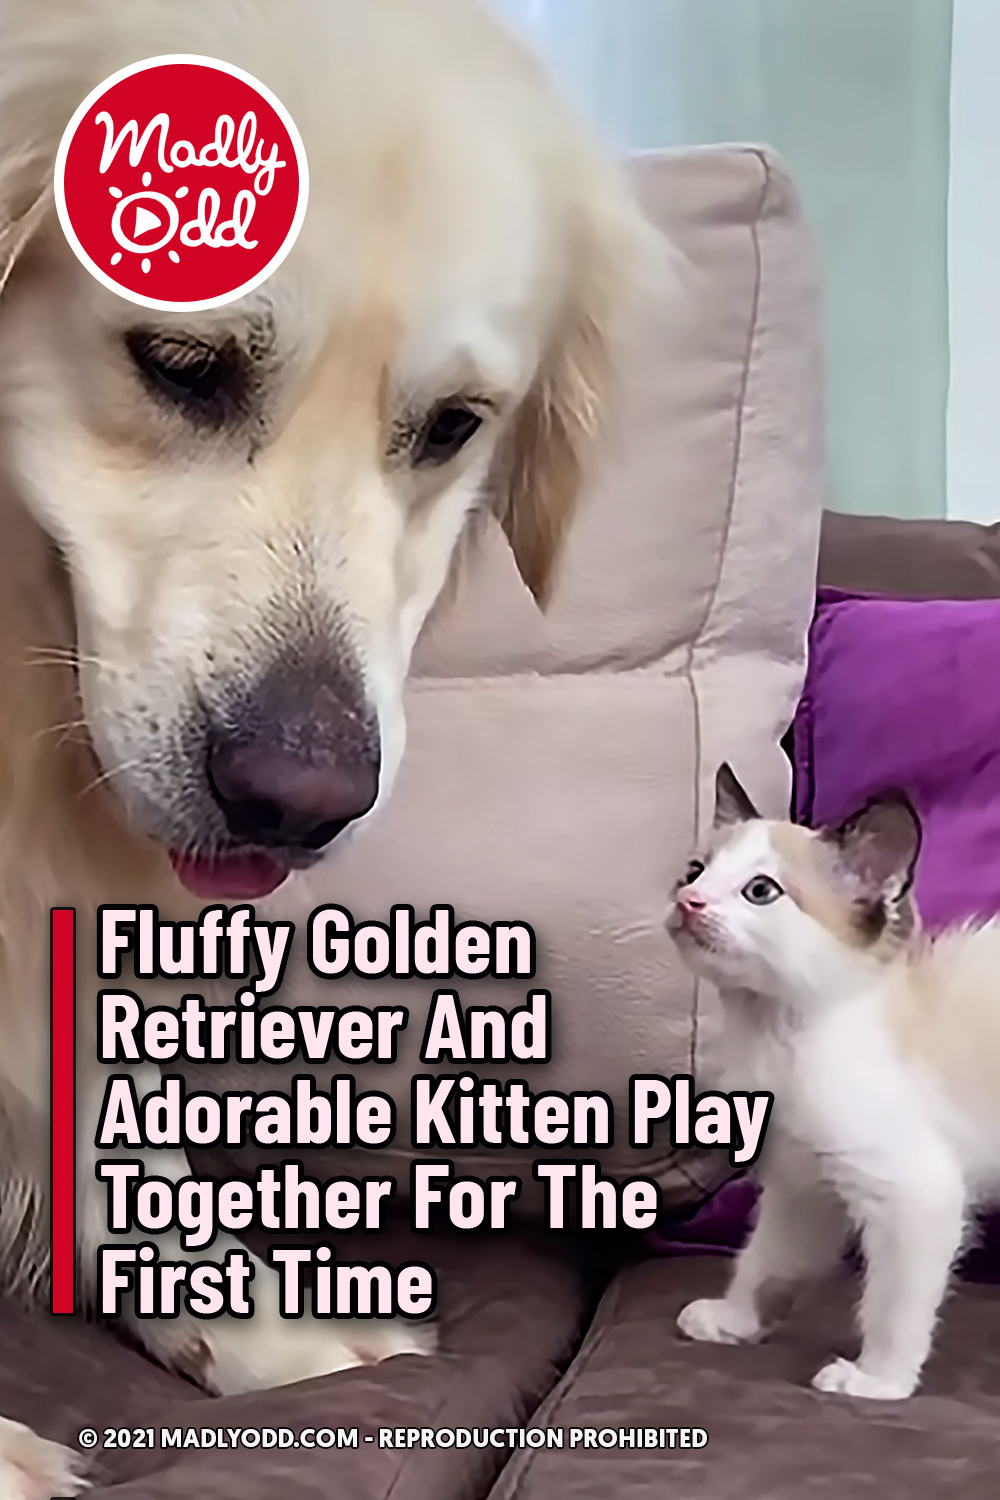 Fluffy Golden Retriever And Adorable Kitten Play Together For The First Time